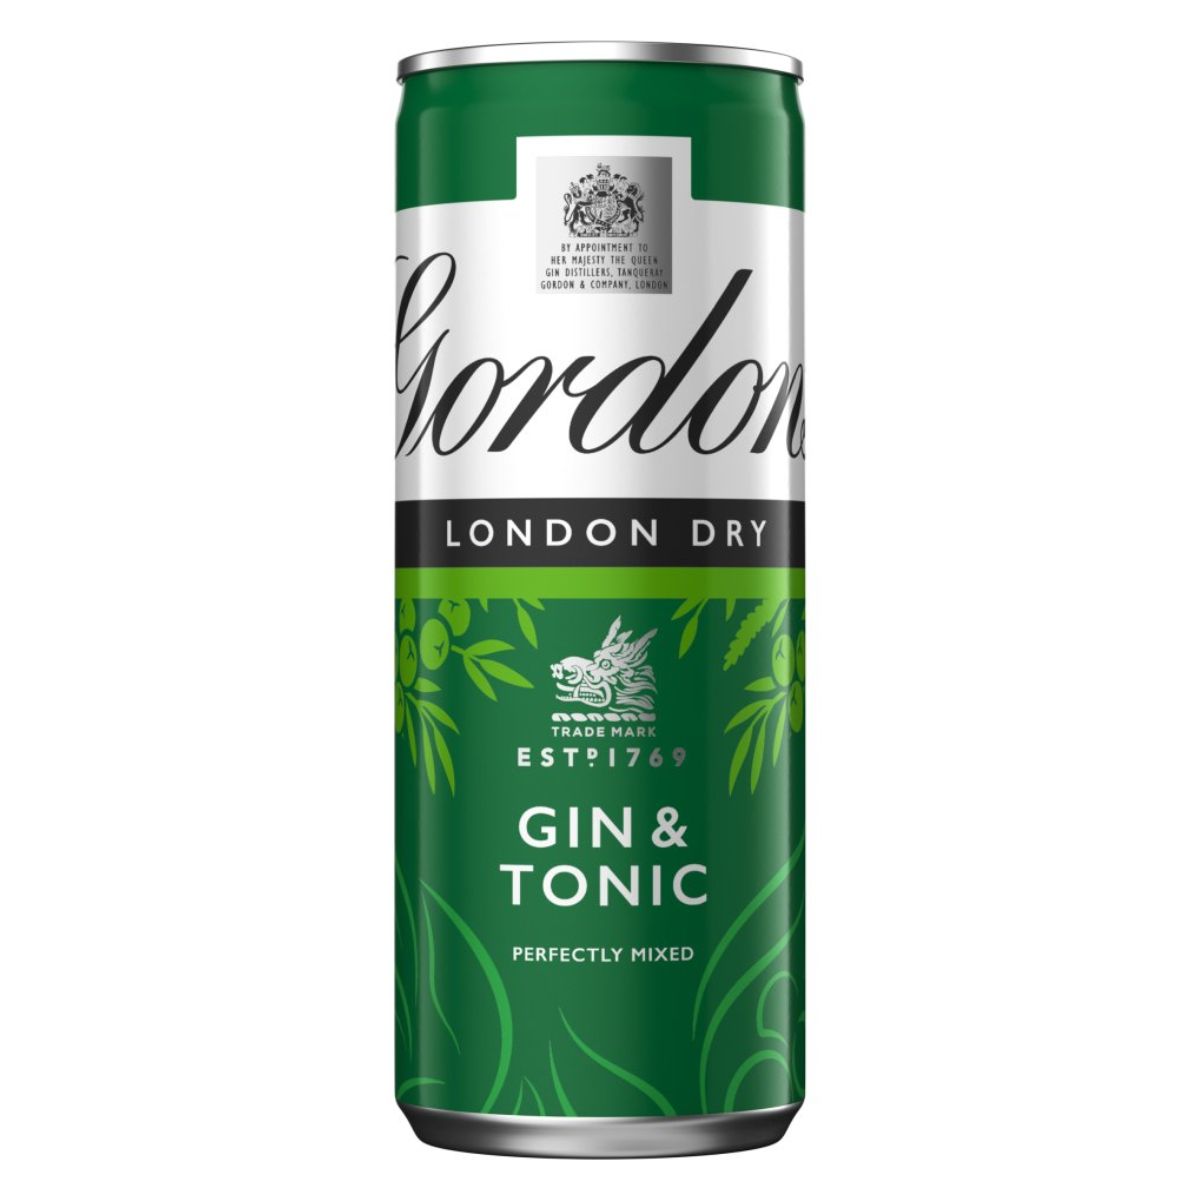 A can of Gordons - Gin & Tonic (5.0% ABV) - 250ml.